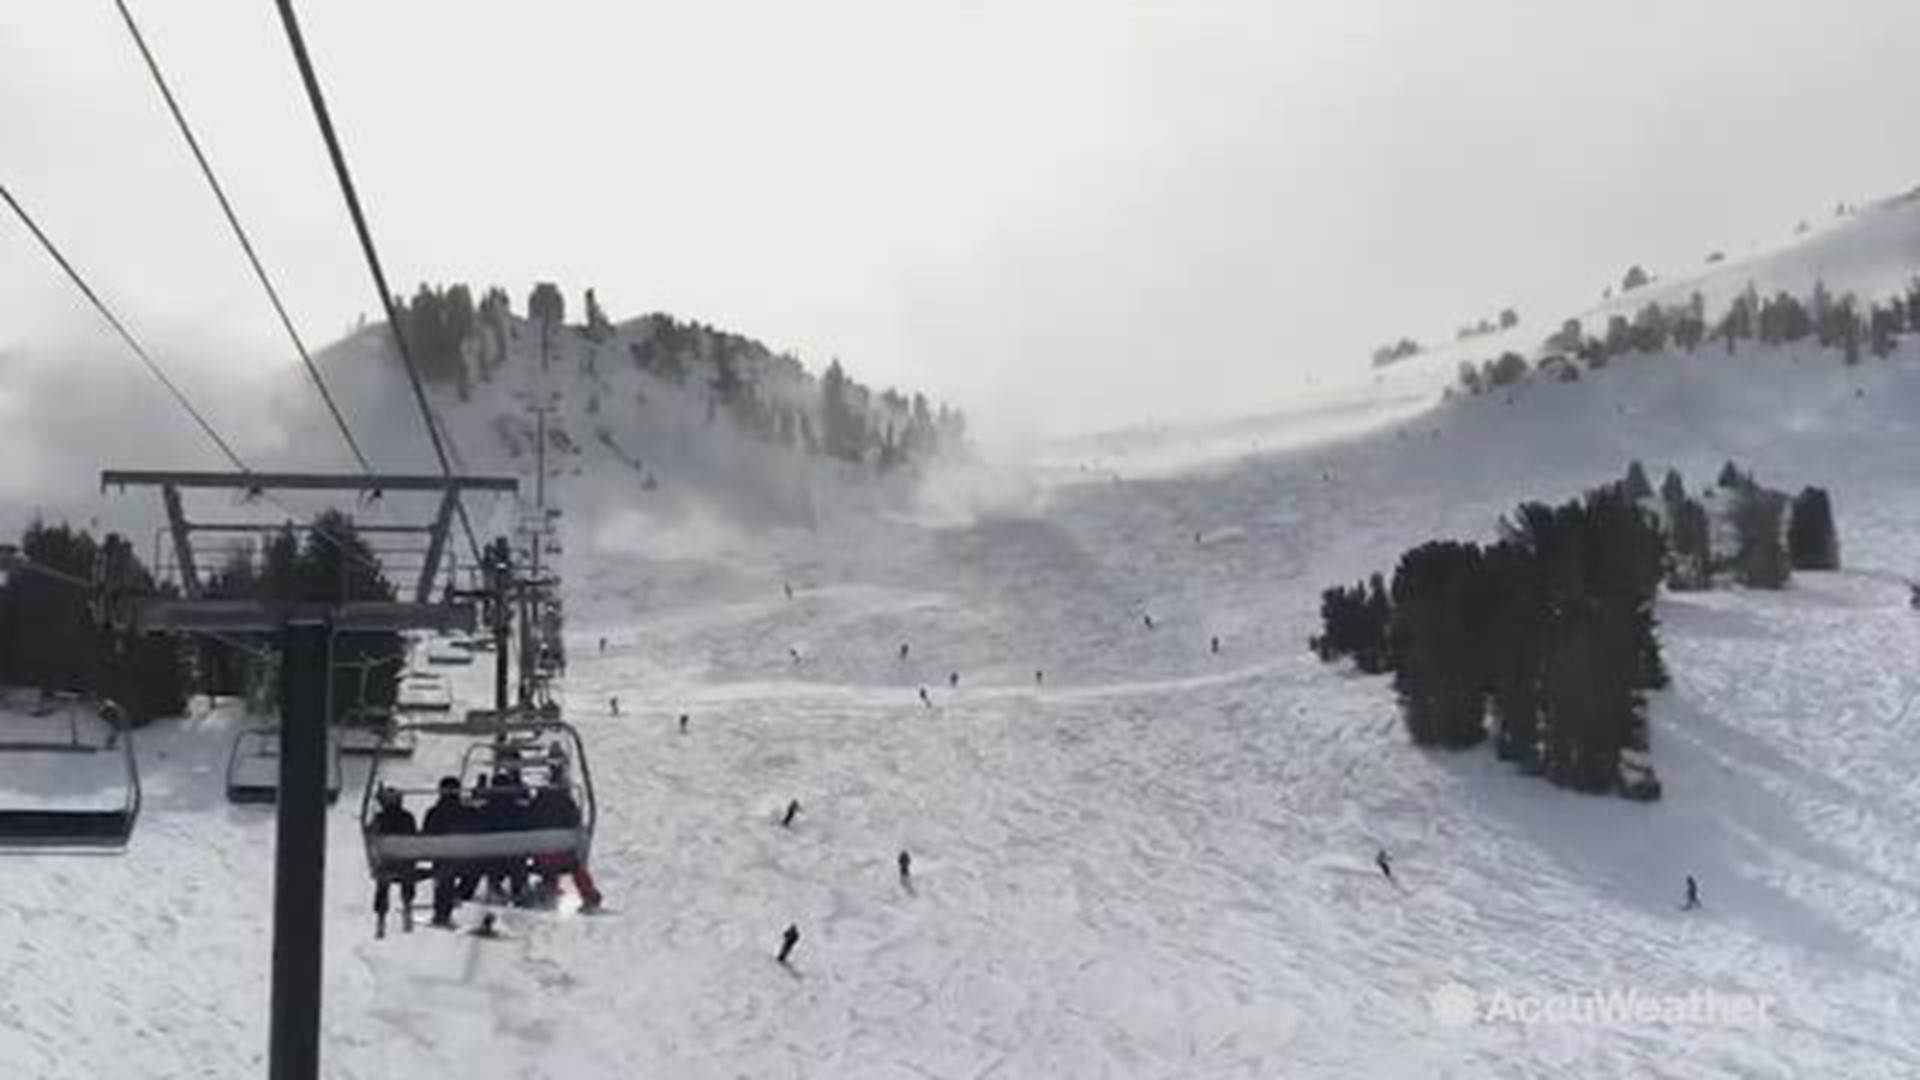 High winds at Mammoth Mountain in California created this 'snow-devil' on January 16th. AccuWeather's Reed Timmer captured the event while covering the blizzard conditions.